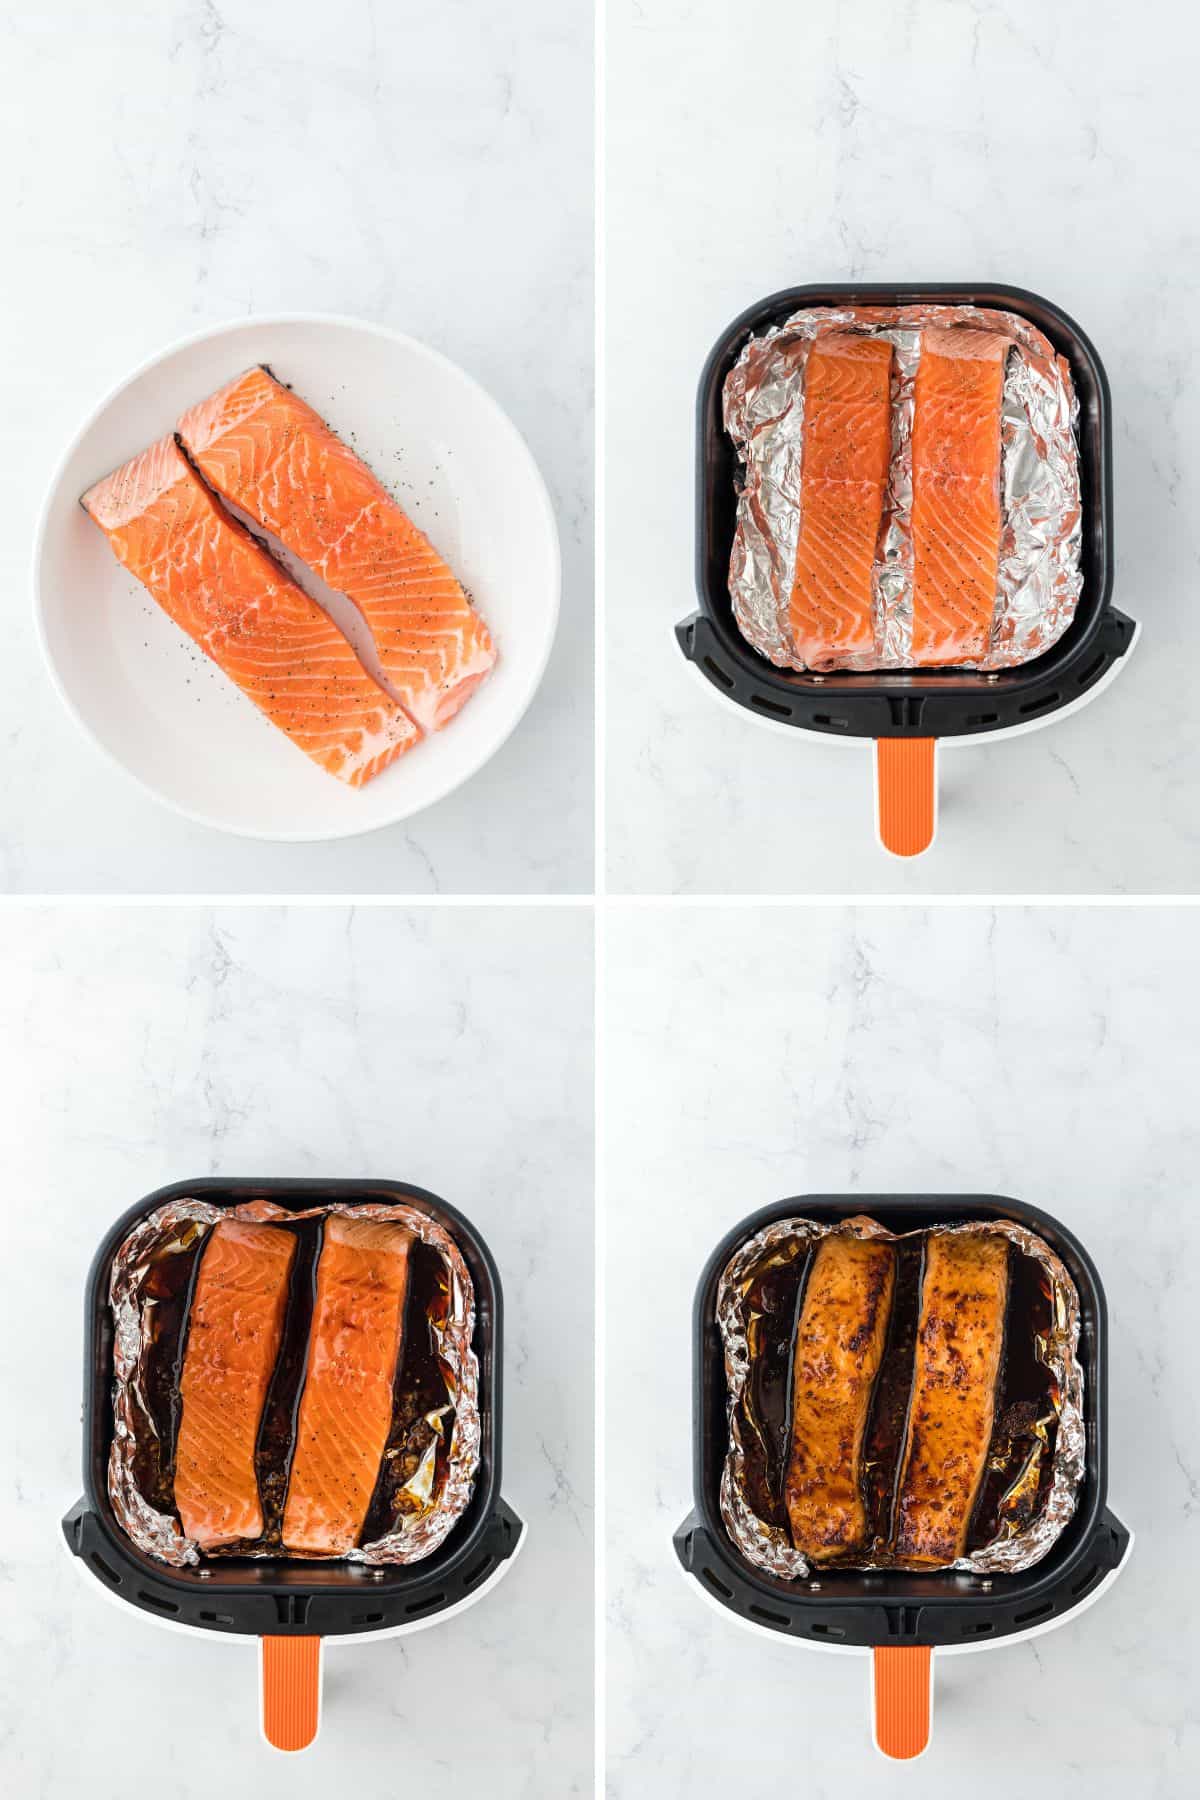 A step by step image collage on how to make air fryer salmon with seasoning the fillets and cooking the fillets in the air fryer